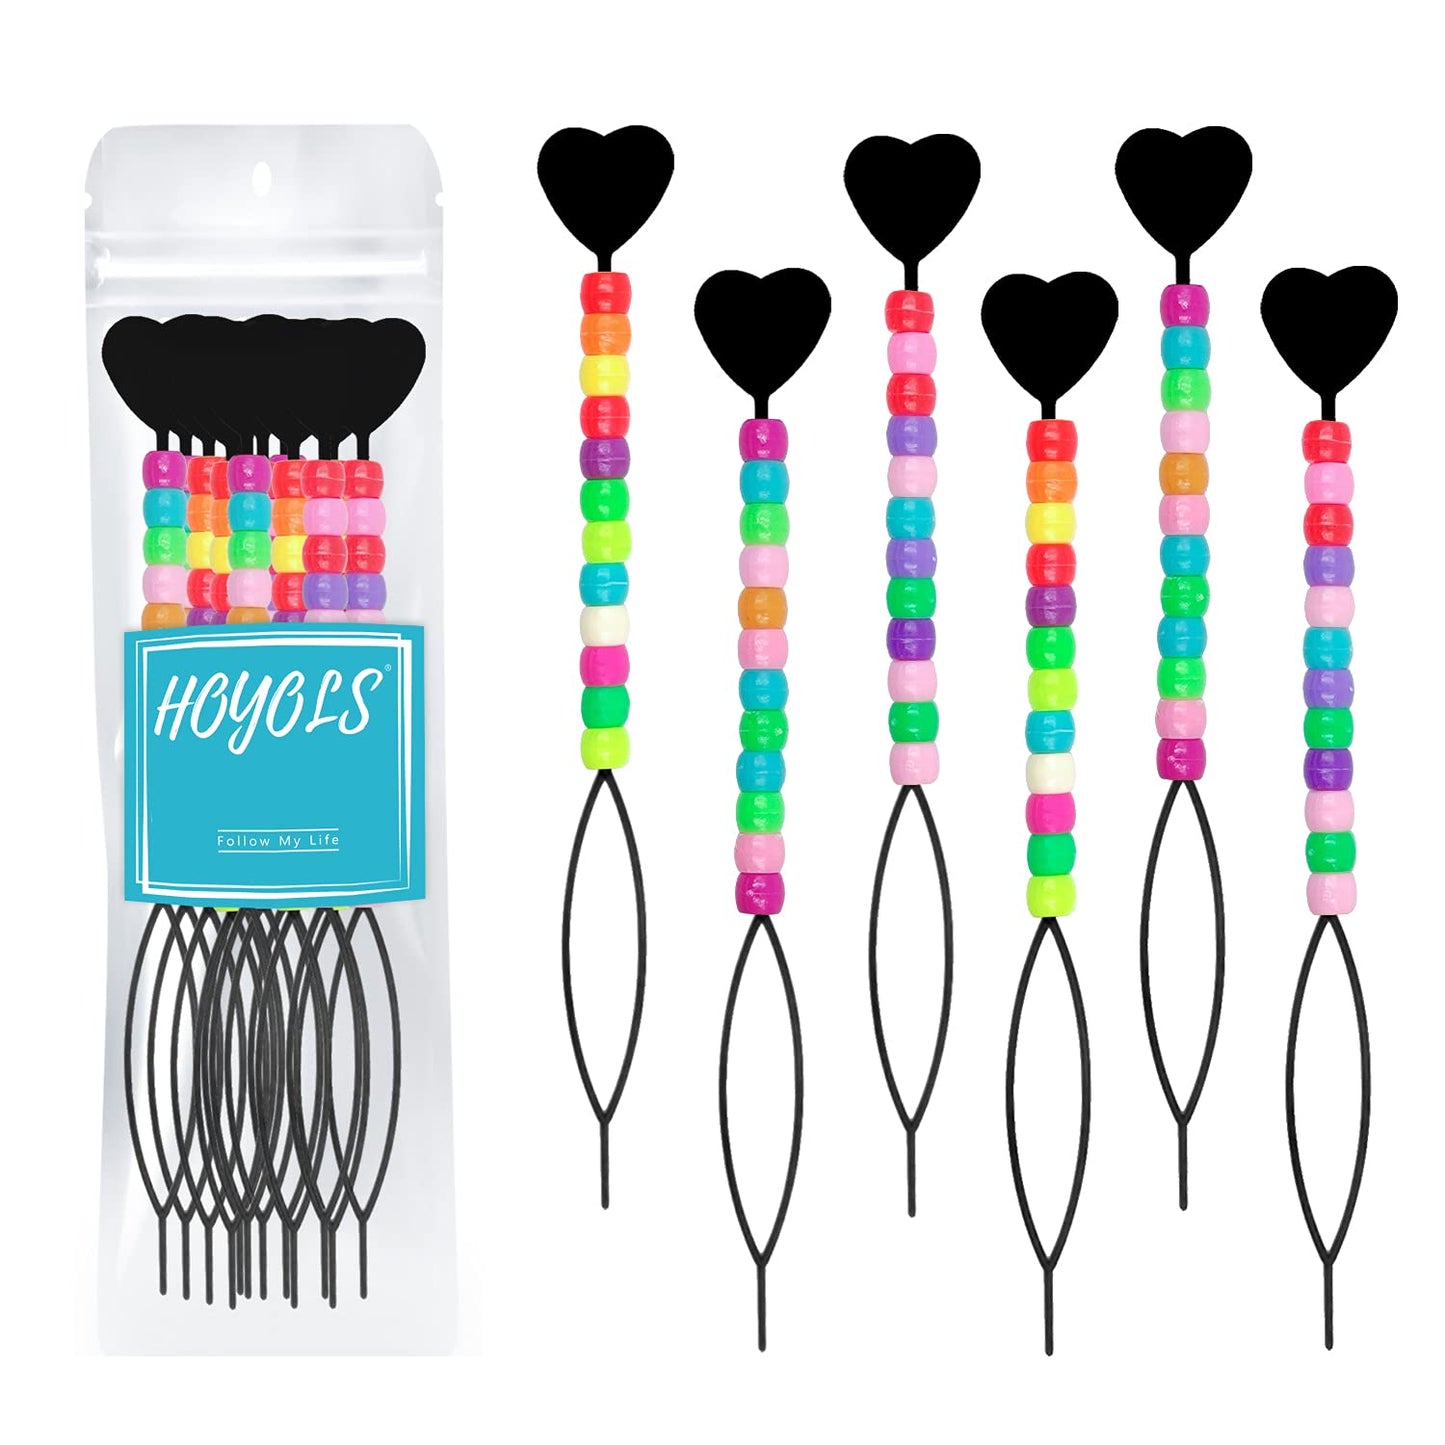 Hoyols Quick Hair Beading Tools with Colorful Pony Beads Magic Topsy Hair Tail Beader for Loading Beads Braid Stringer Ponytail Maker Styling for Kids Girls 6pcs Black